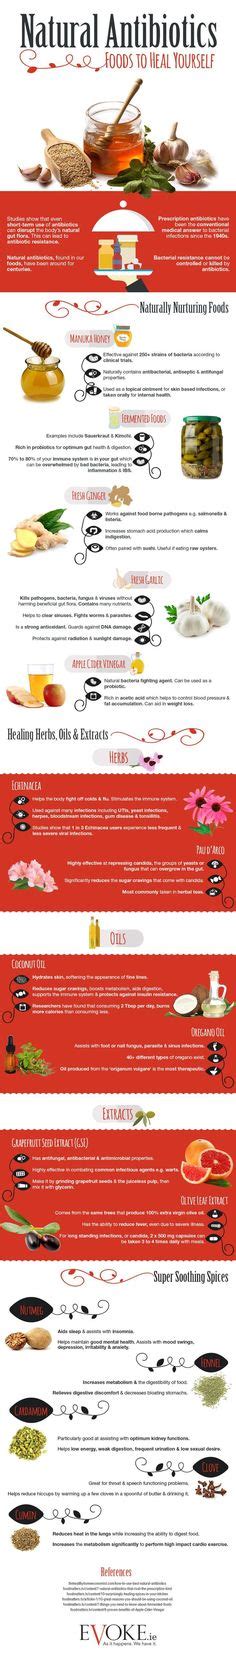 Natural Antibiotics Foods To Heal Yourself Infographic Check Out